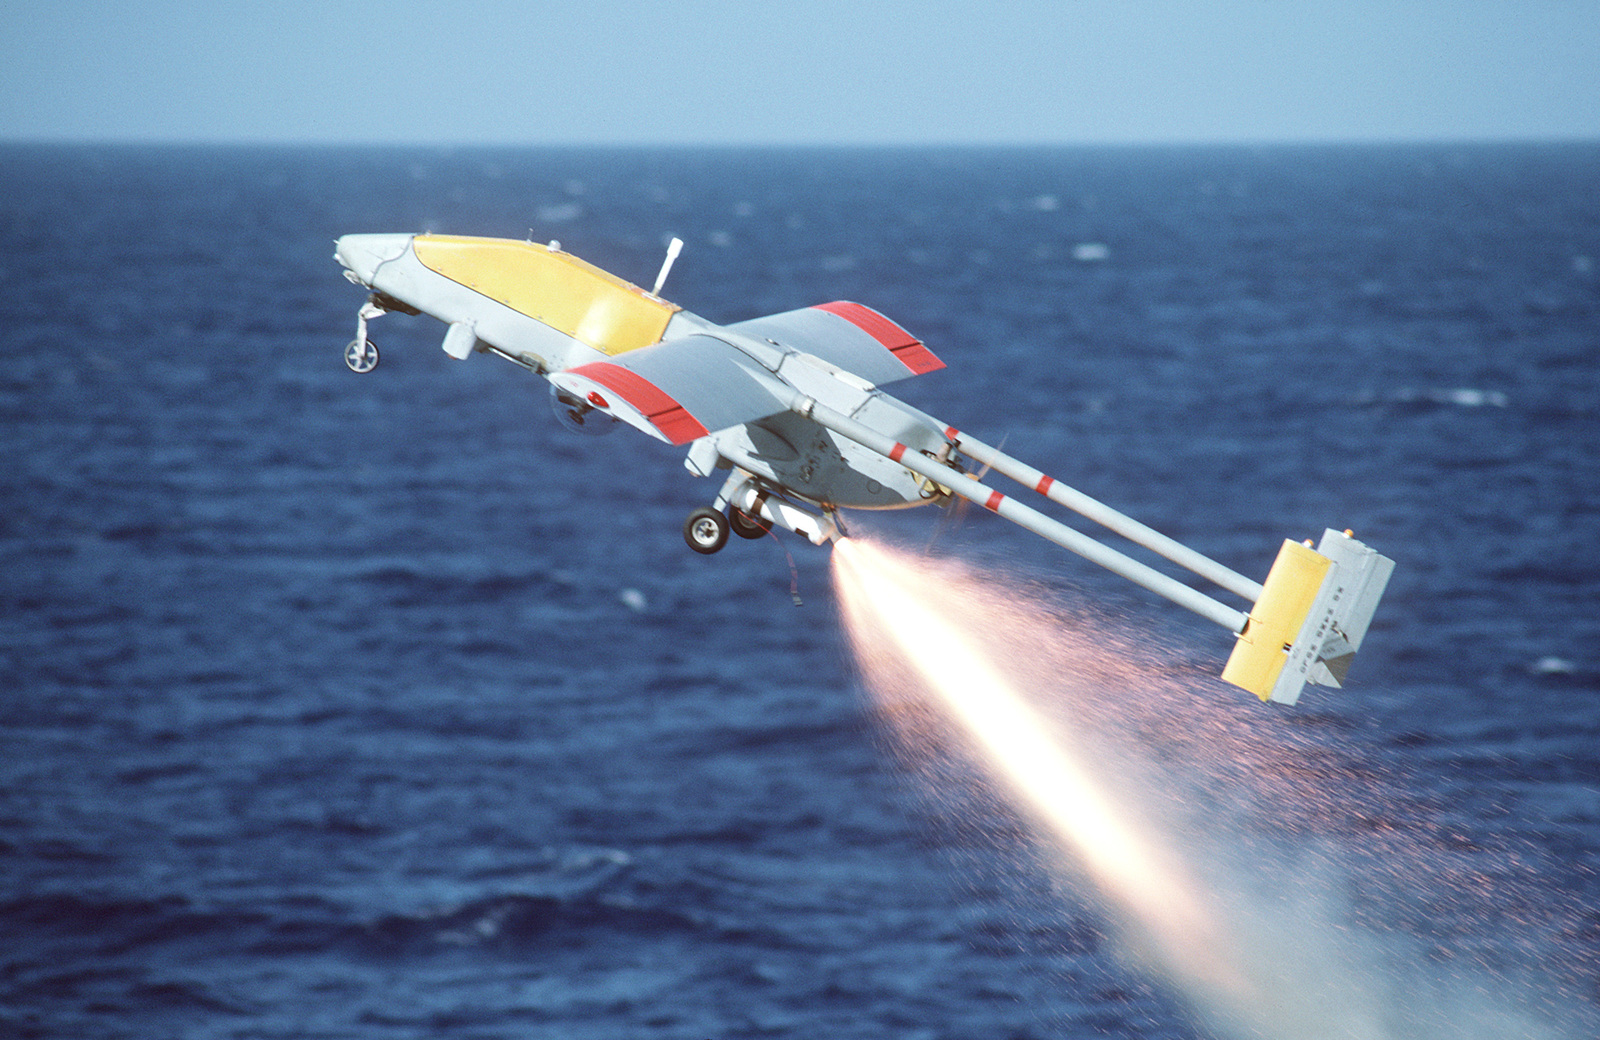 a-pioneer-i-remotely-piloted-vehicle-rpv-is-launched-during-a-rocket-booster-c502a6-1600.jpg